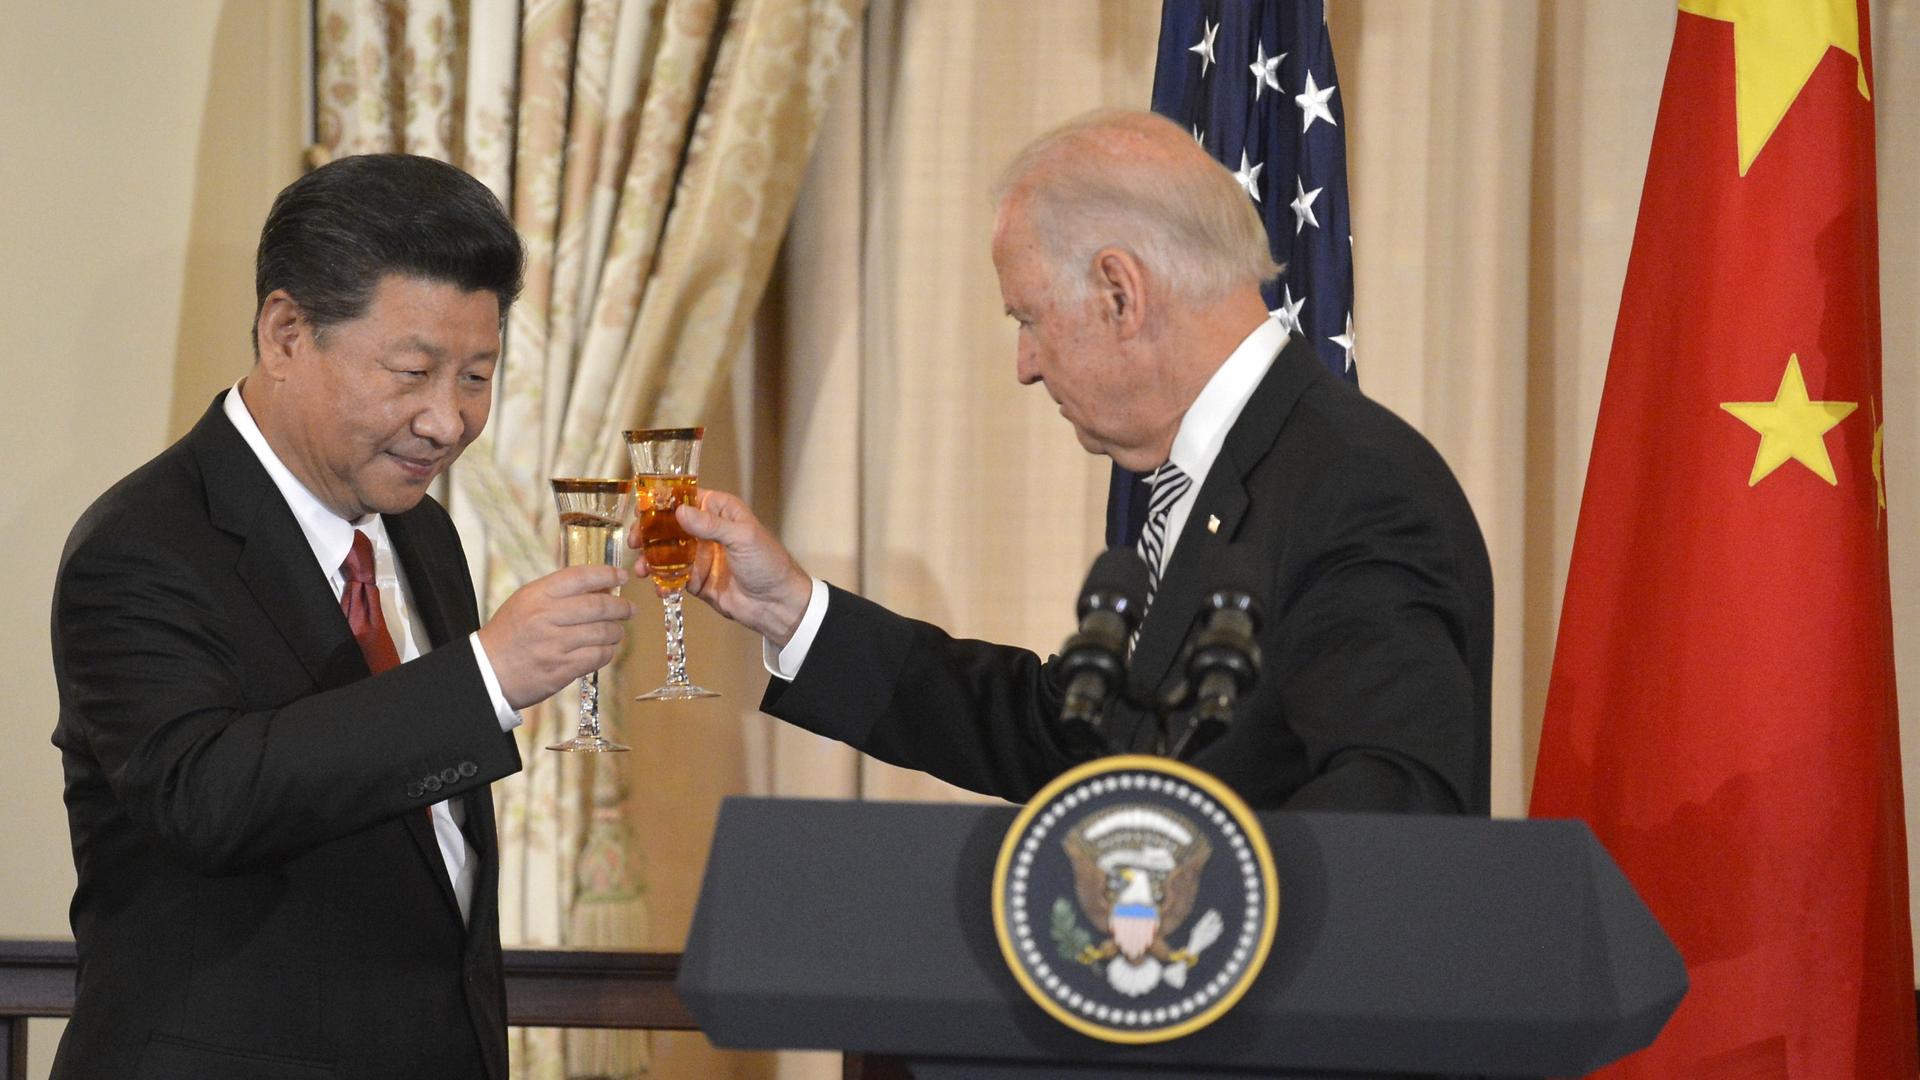 Chinese President Xi Jinping and then-Vice President Joe Biden raise their glasses in a toast during a luncheon at the State Department, in Washington, Sept. 25, 2015. 